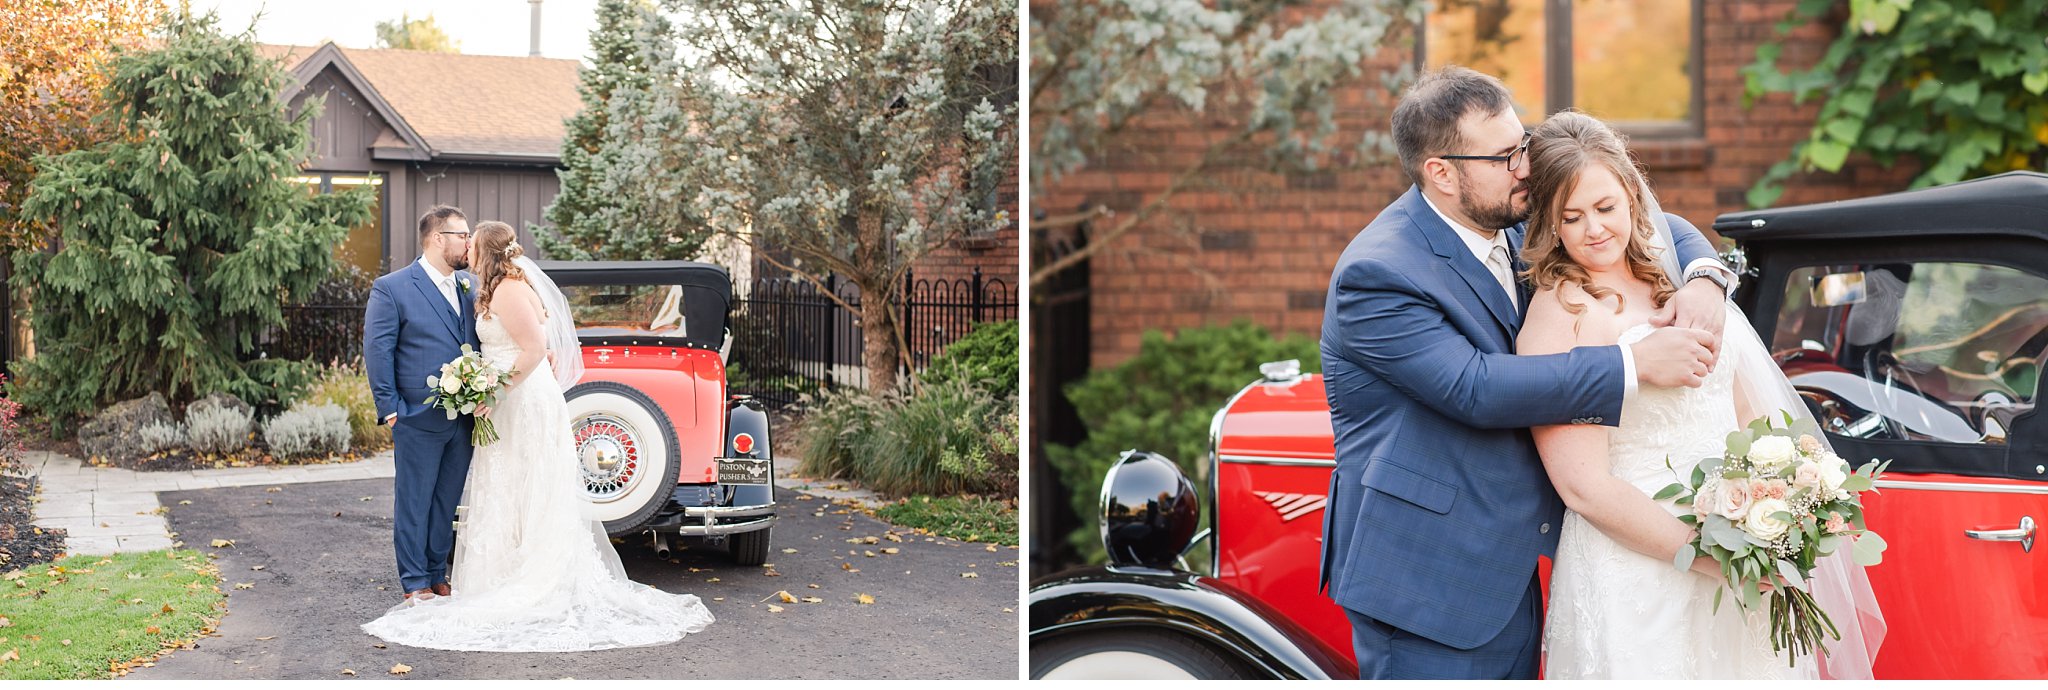 bride and groom pose with antique car